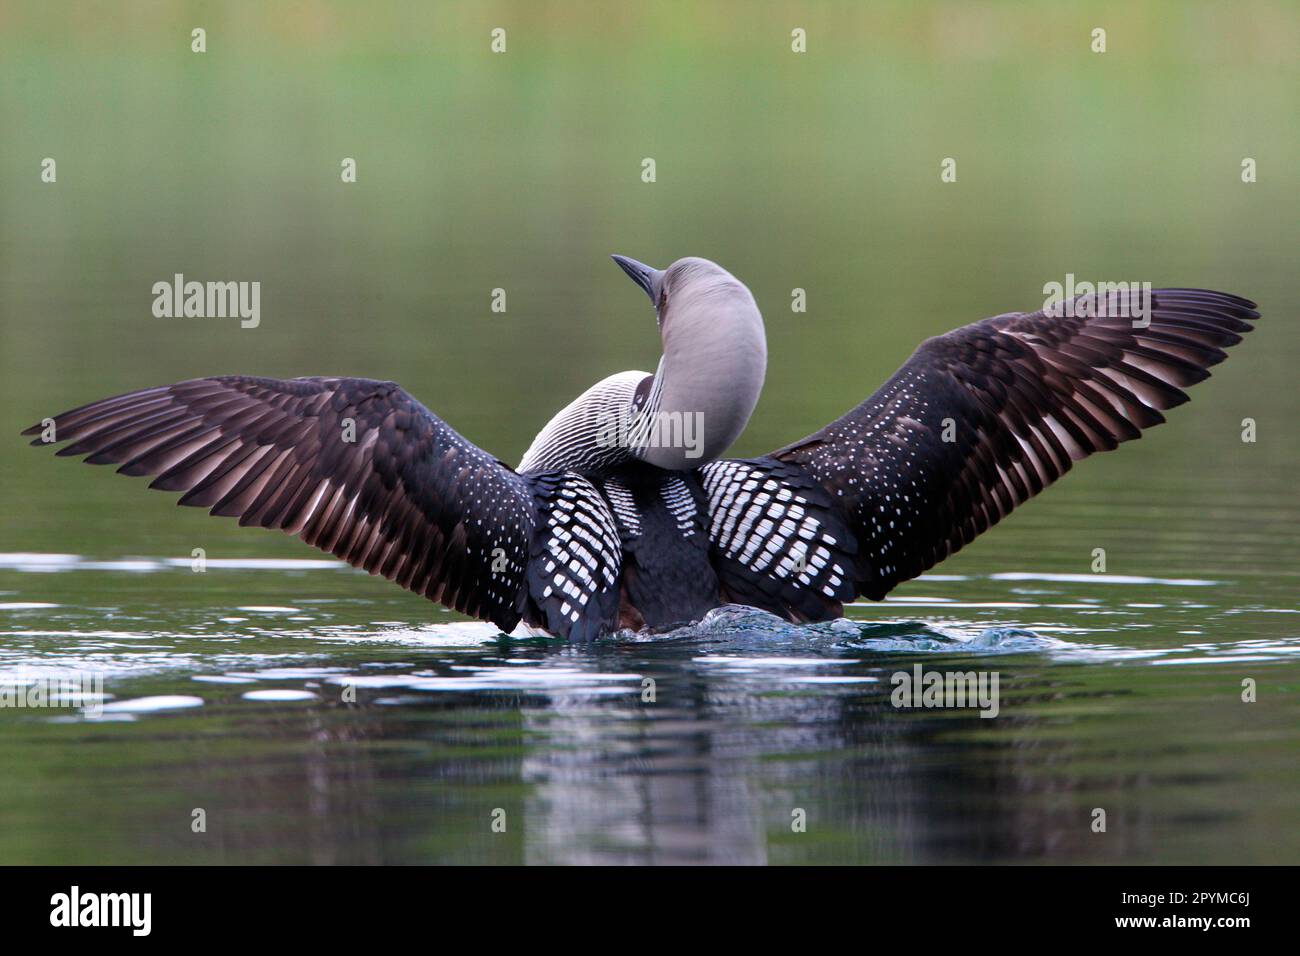 Adult black-throated loon (Gavia arctica), lifting wings at sea, Finland Stock Photo